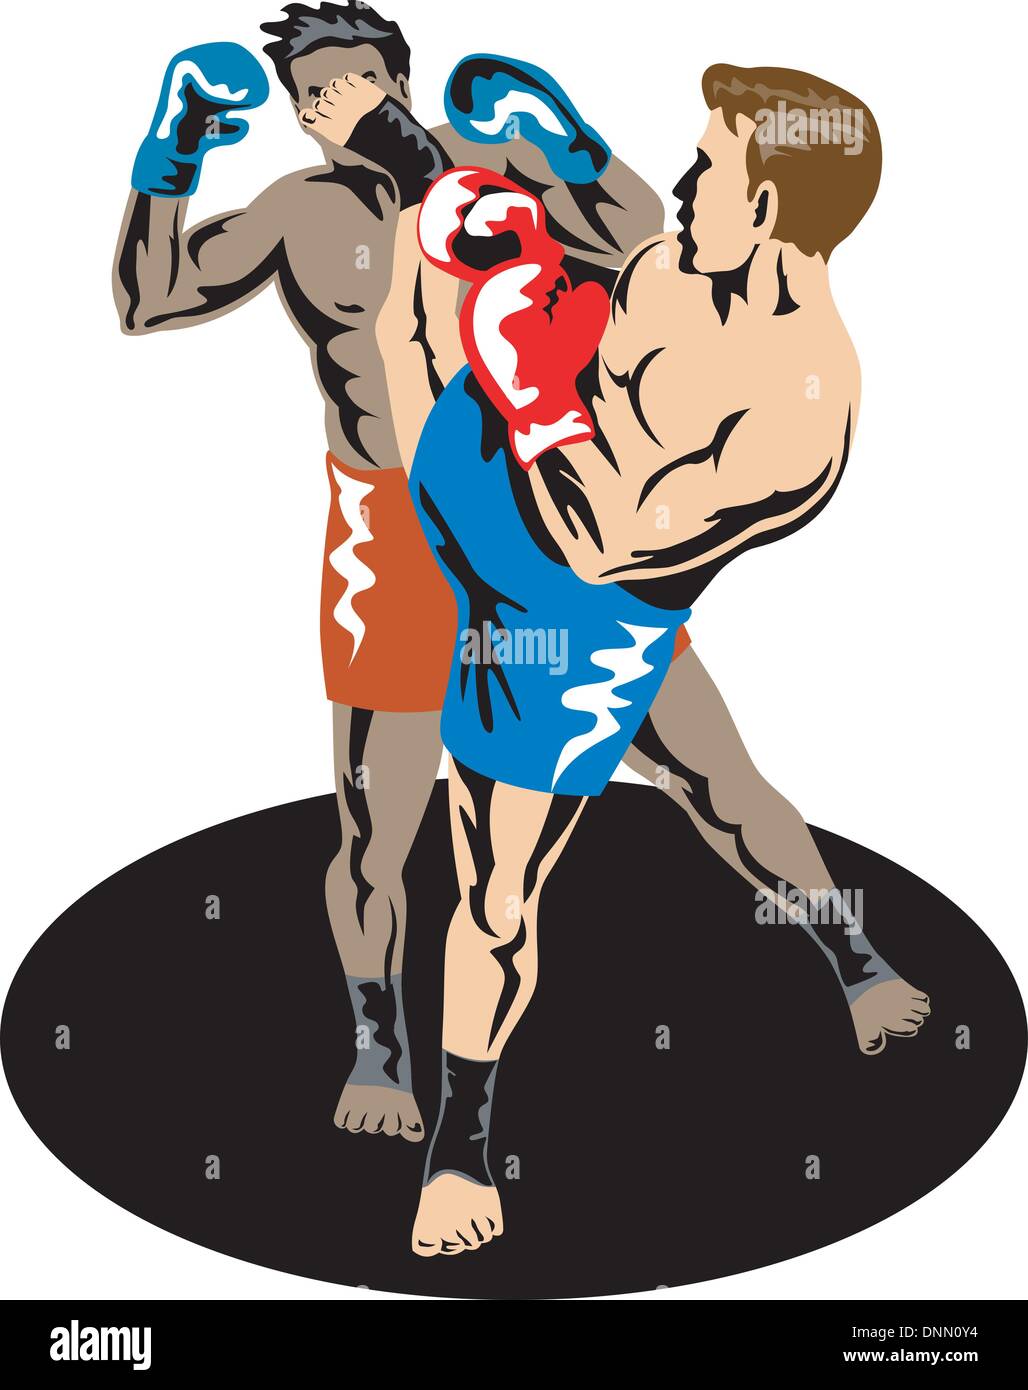 Illustration of a kickboxer boxing kicking fighting done in retro style. Stock Vector